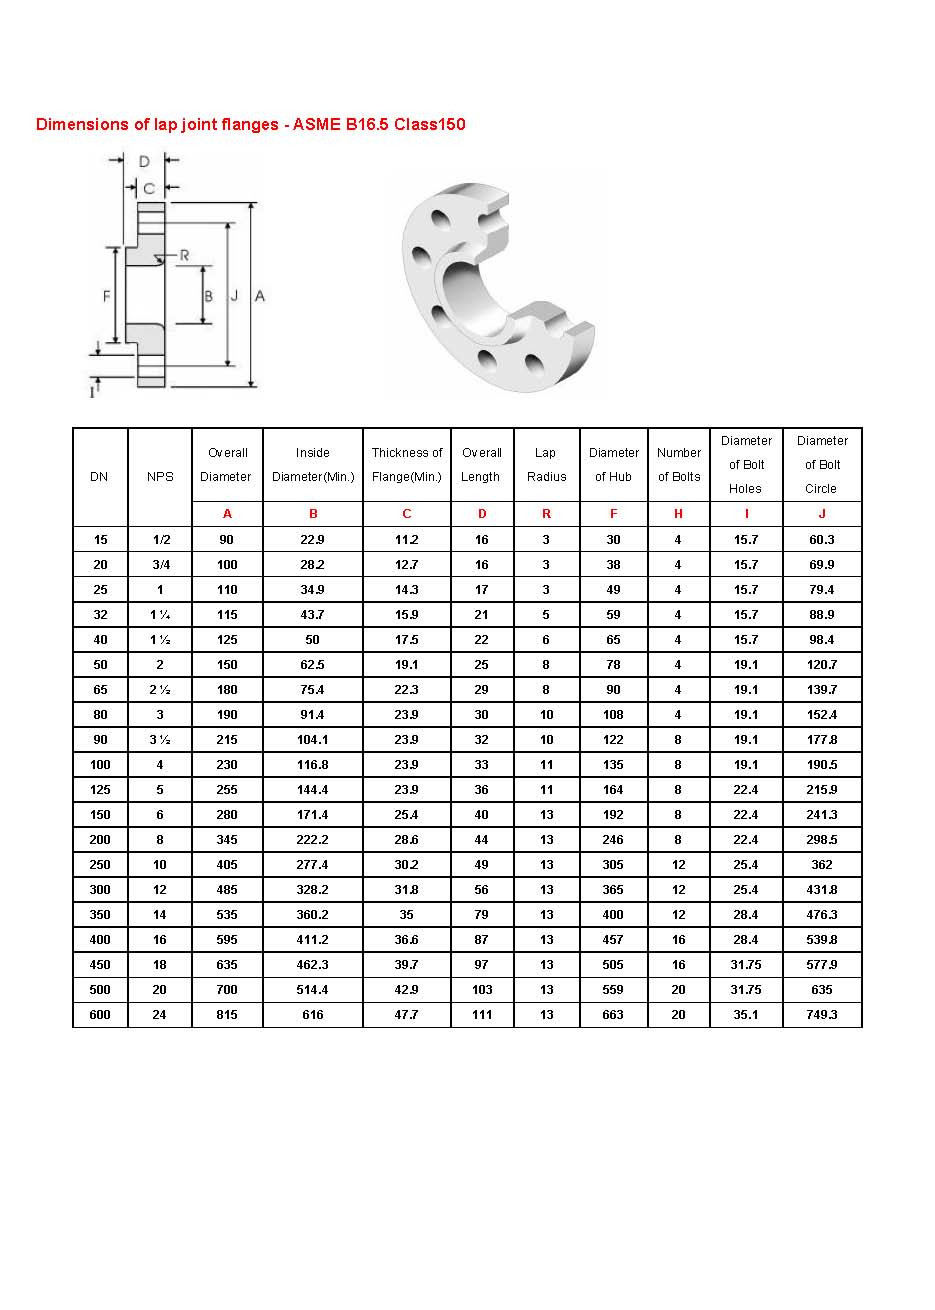 Dimensions of lap joint flanges - ASME B16.5_class150